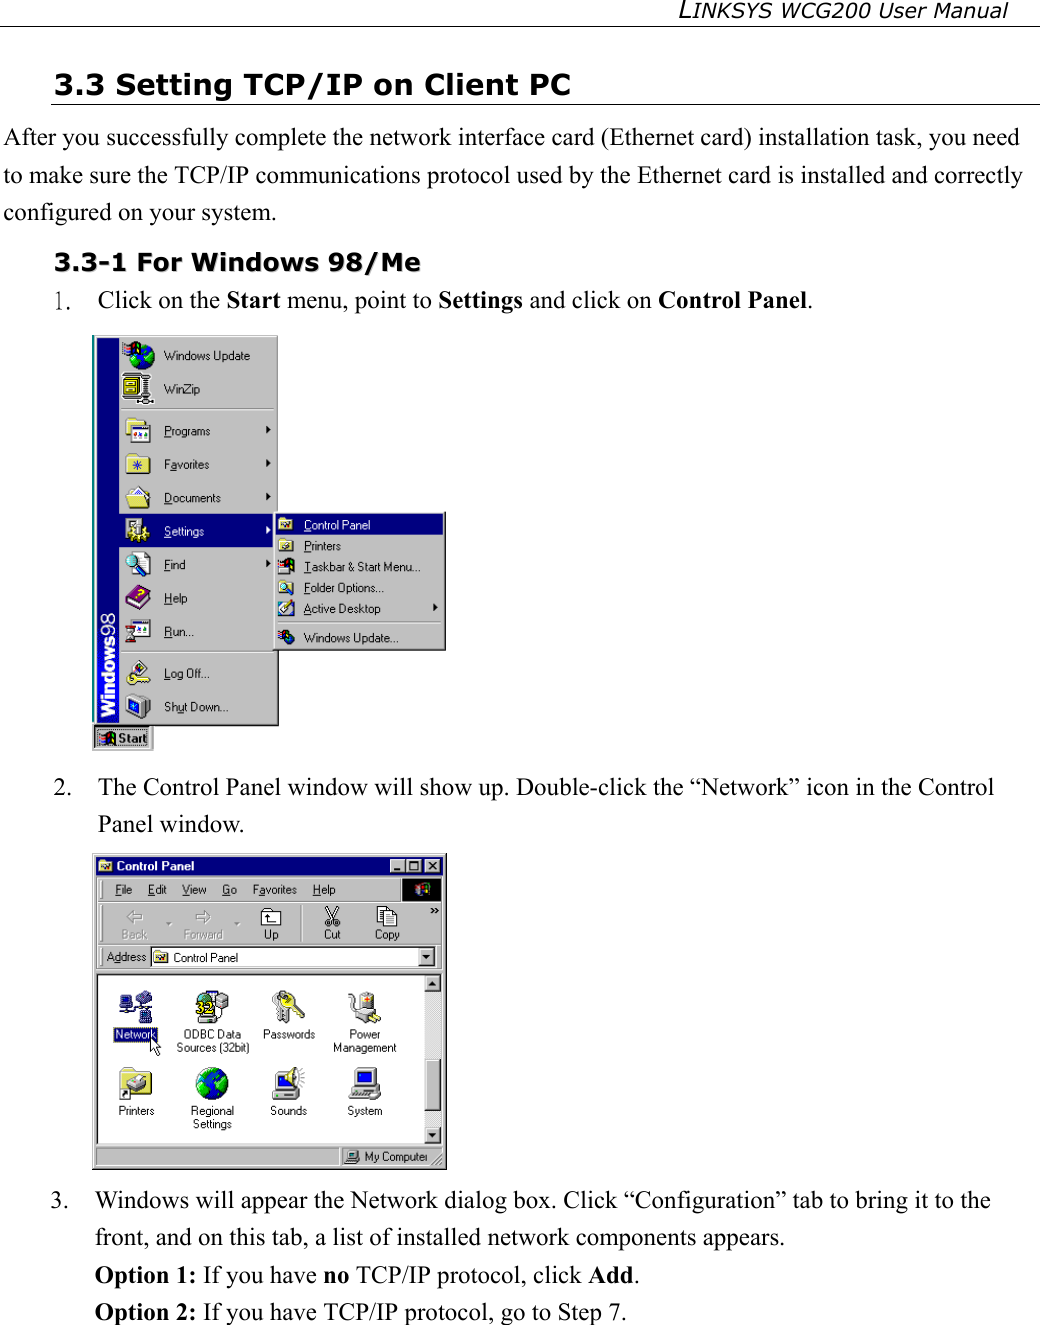 LINKSYS WCG200 User Manual   3.3 Setting TCP/IP on Client PC After you successfully complete the network interface card (Ethernet card) installation task, you need to make sure the TCP/IP communications protocol used by the Ethernet card is installed and correctly configured on your system.  33..33--11  FFoorr  WWiinnddoowwss  9988//MMee  1.  Click on the Start menu, point to Settings and click on Control Panel.  2.  The Control Panel window will show up. Double-click the “Network” icon in the Control Panel window.    3.  Windows will appear the Network dialog box. Click “Configuration” tab to bring it to the front, and on this tab, a list of installed network components appears.   Option 1: If you have no TCP/IP protocol, click Add. Option 2: If you have TCP/IP protocol, go to Step 7.   